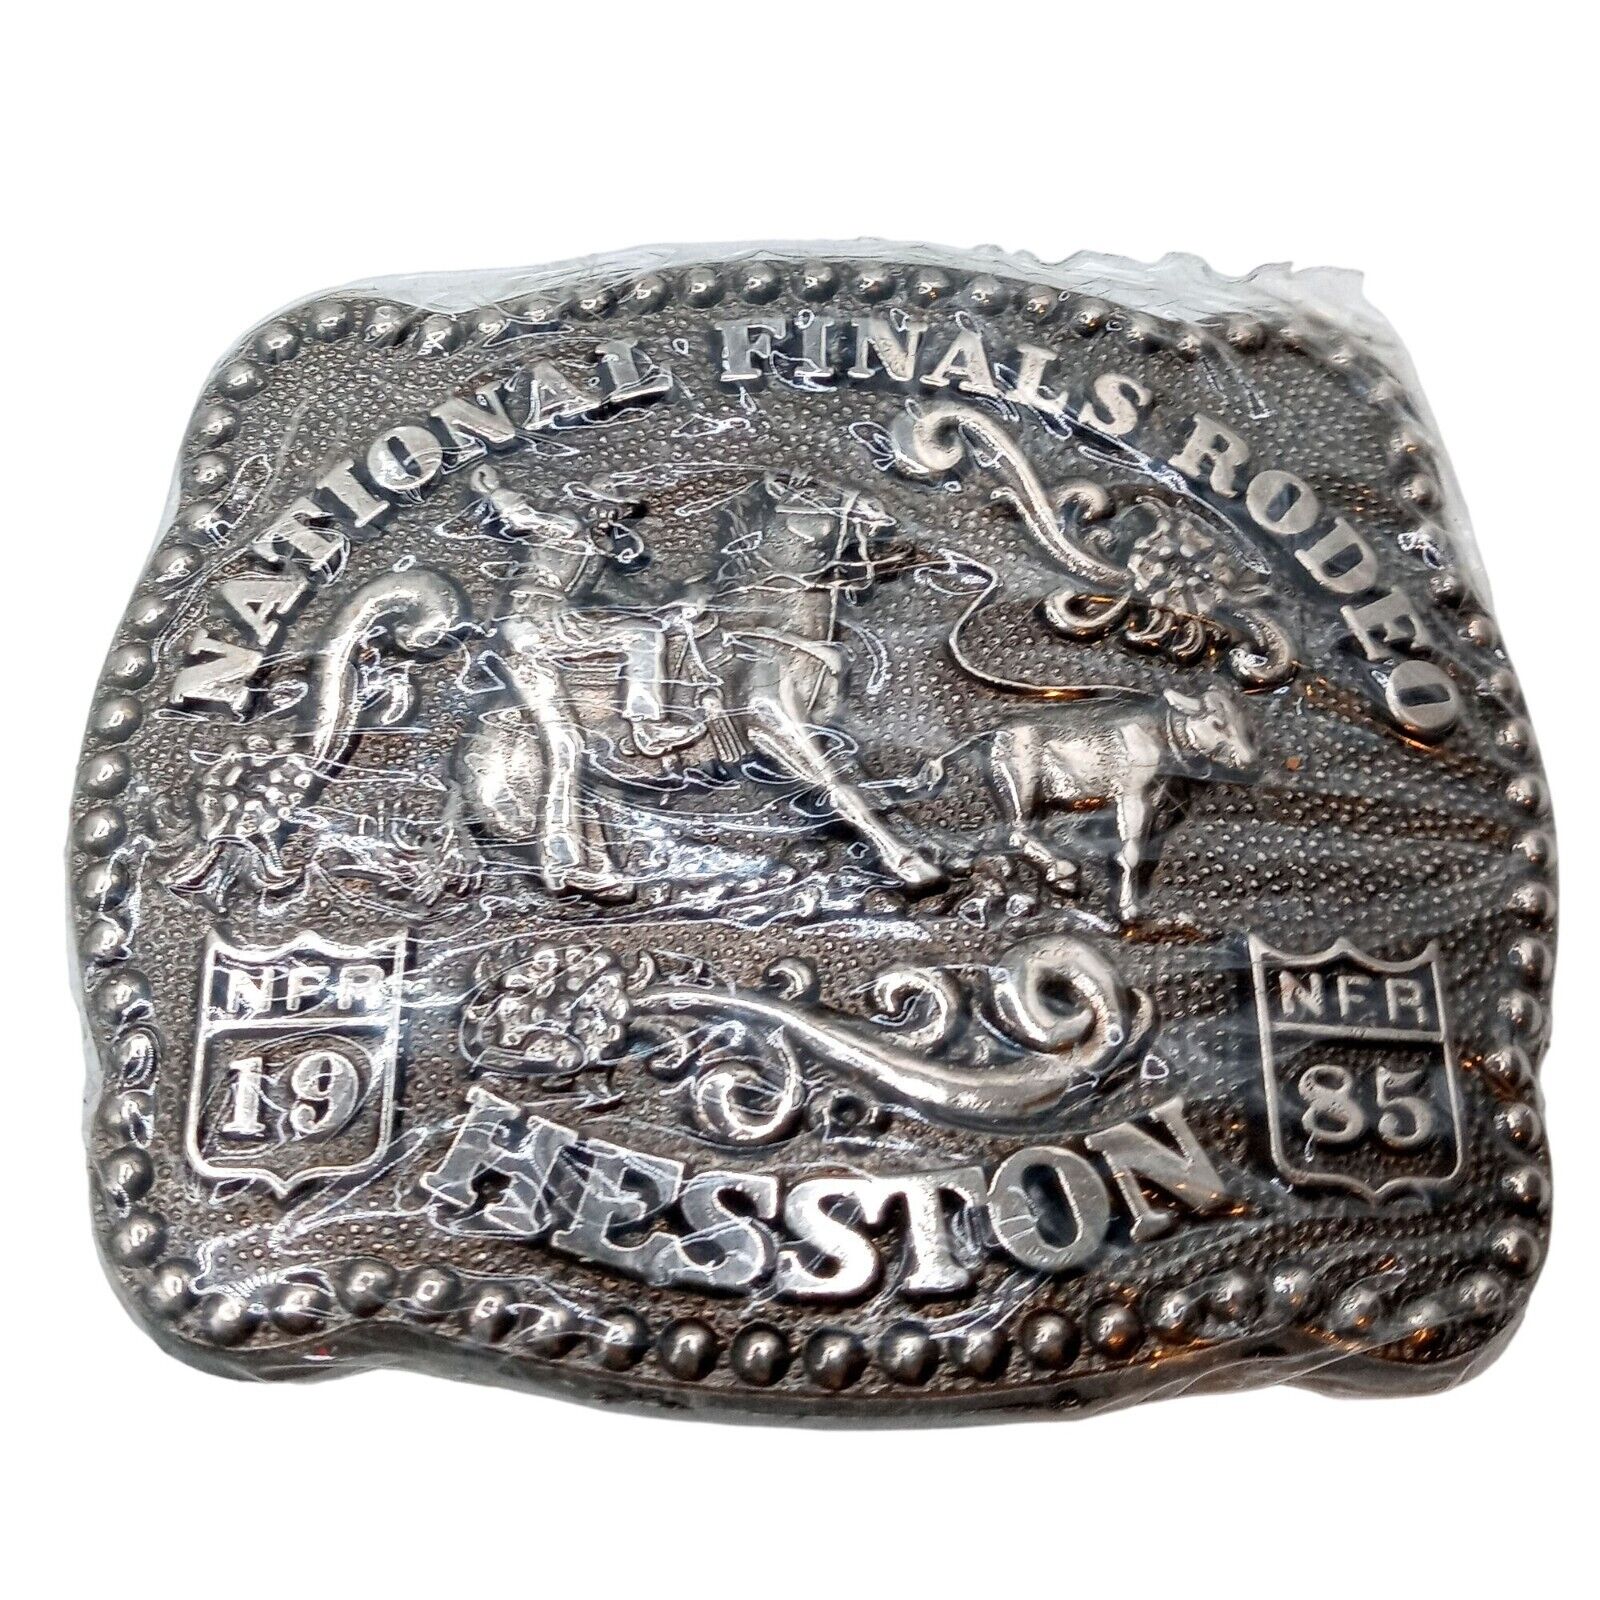 1985 Small Rodeo Belt Buckle NFR Youth Roping Kids National Finals NOS